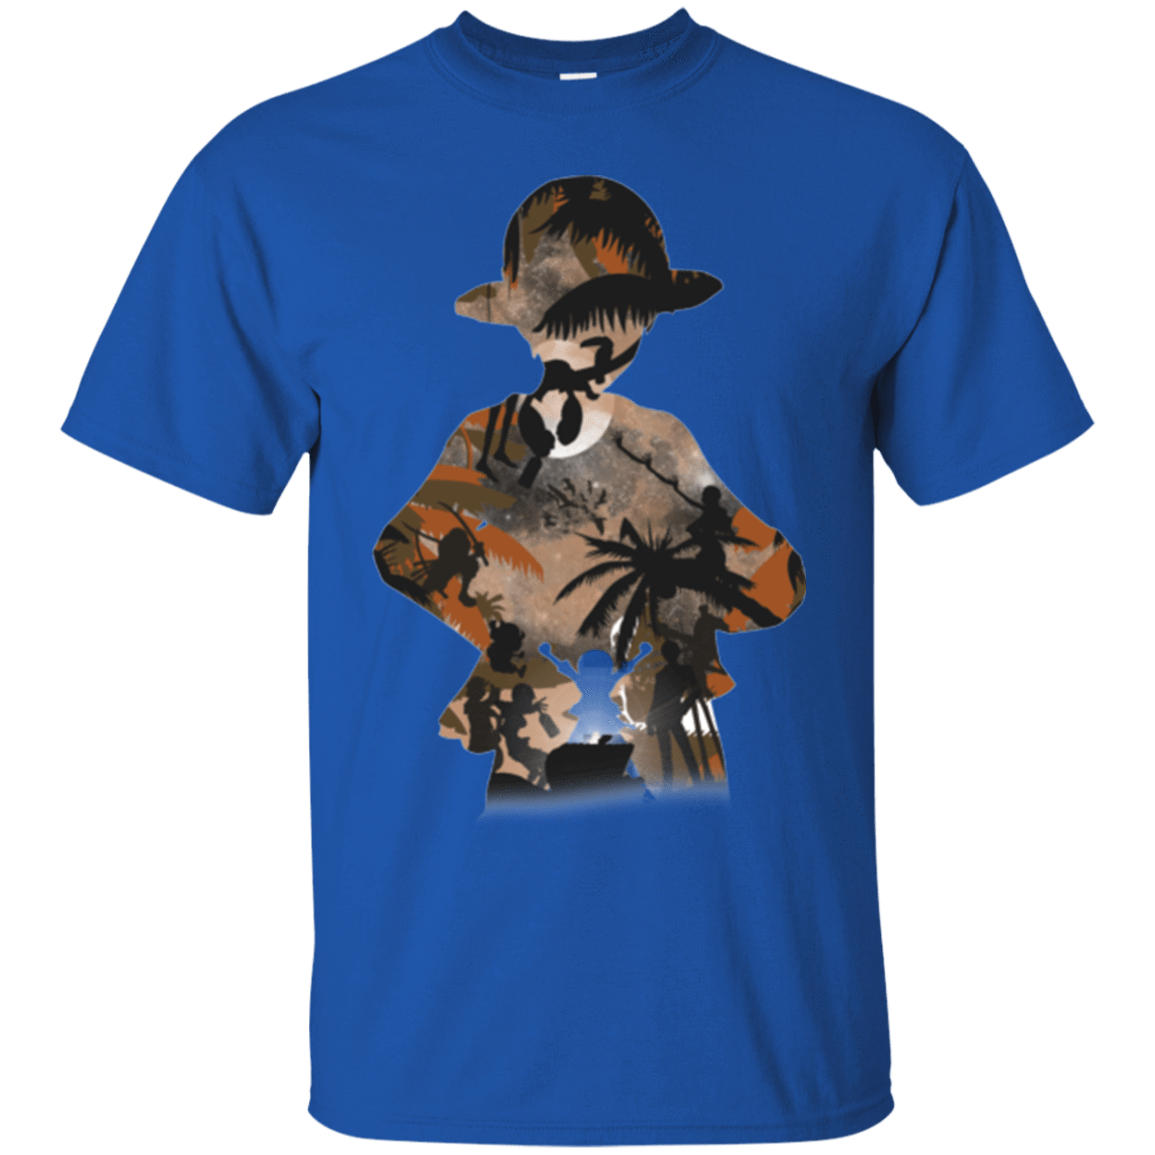 T-Shirts Royal / Small The Straw Hat Crew T-Shirt